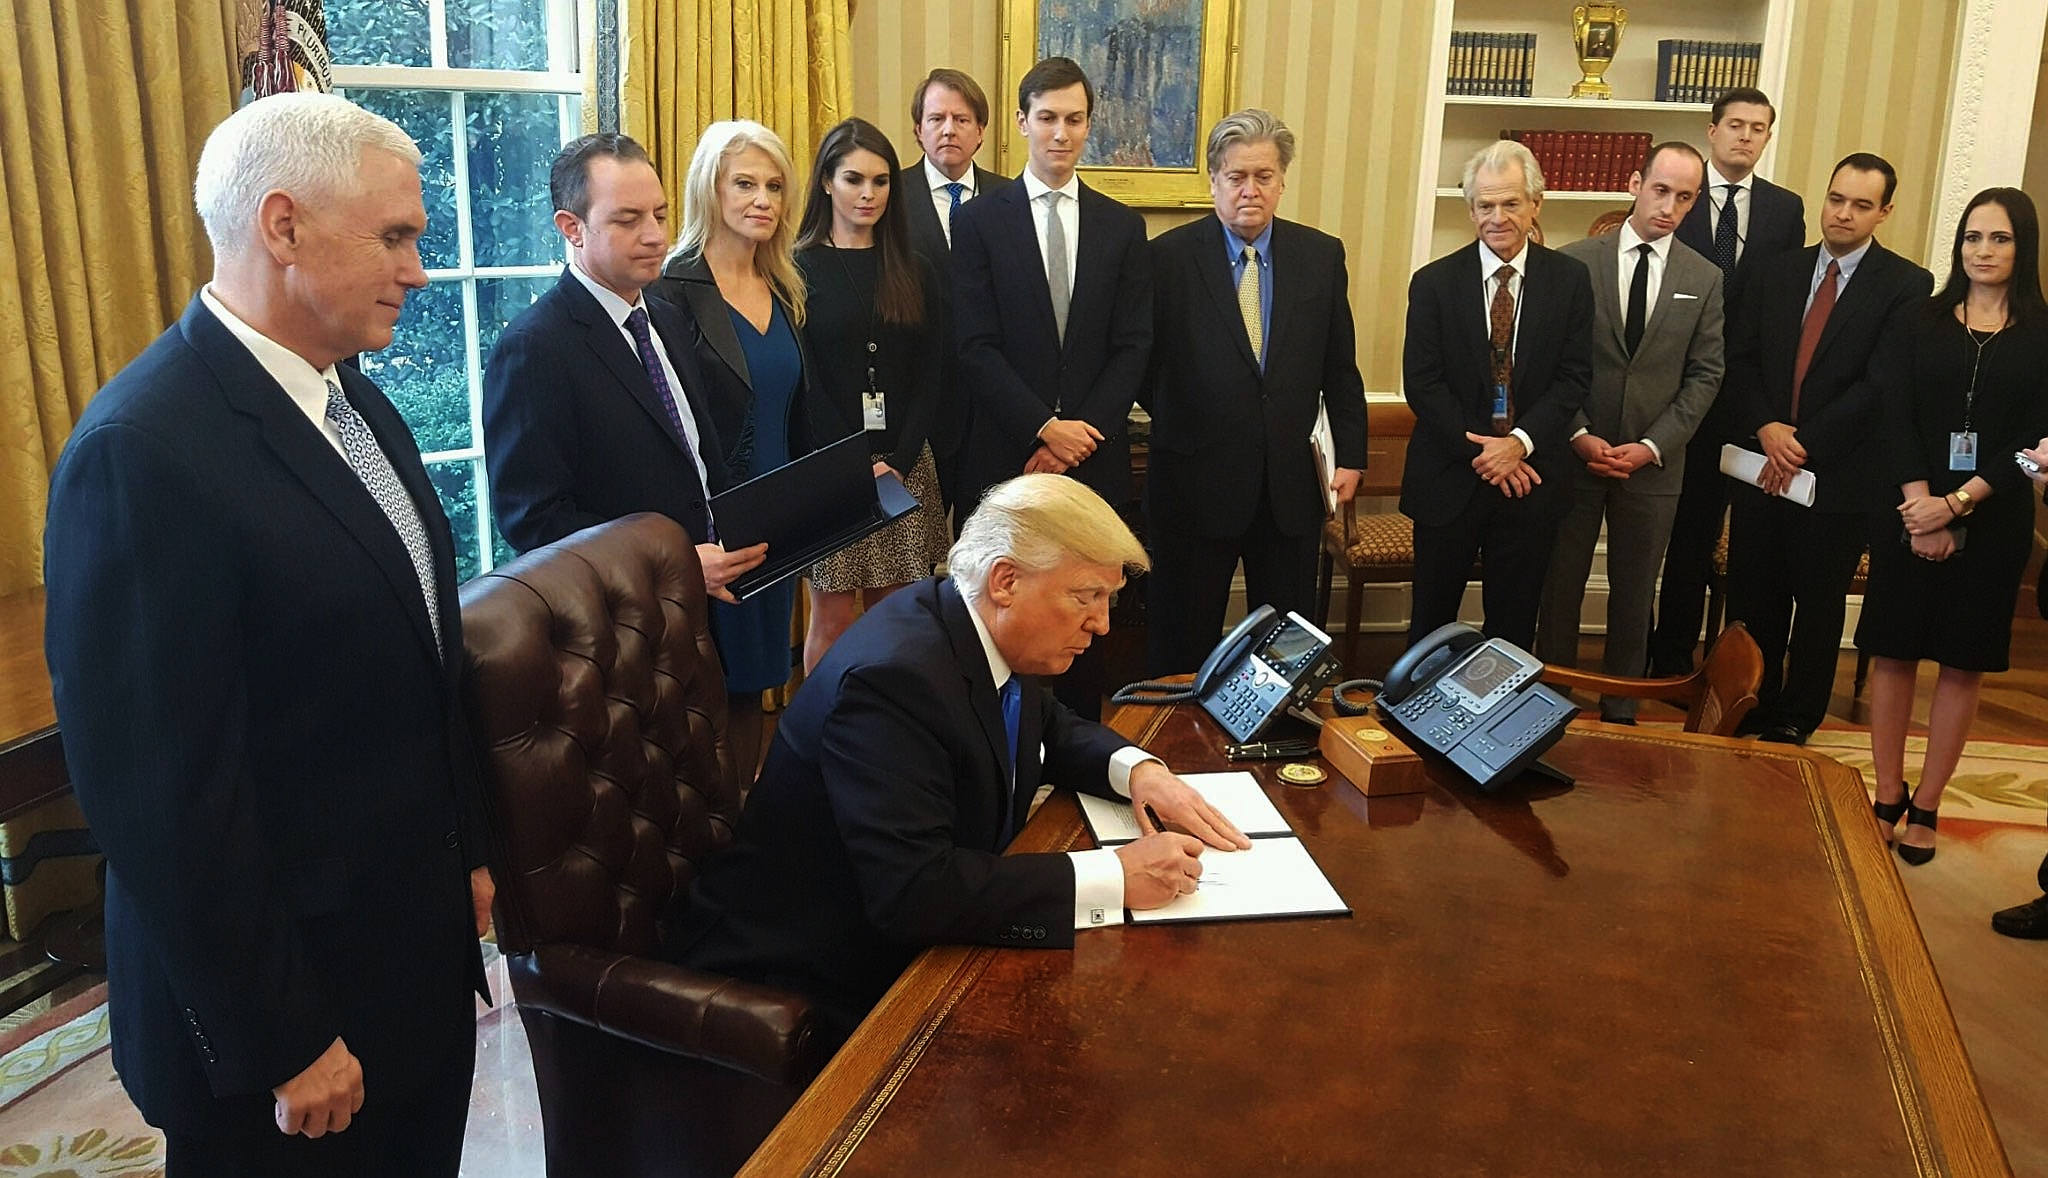 Image: After GOP liars failed to repeal Obamacare, Trump will gut the law with executive orders